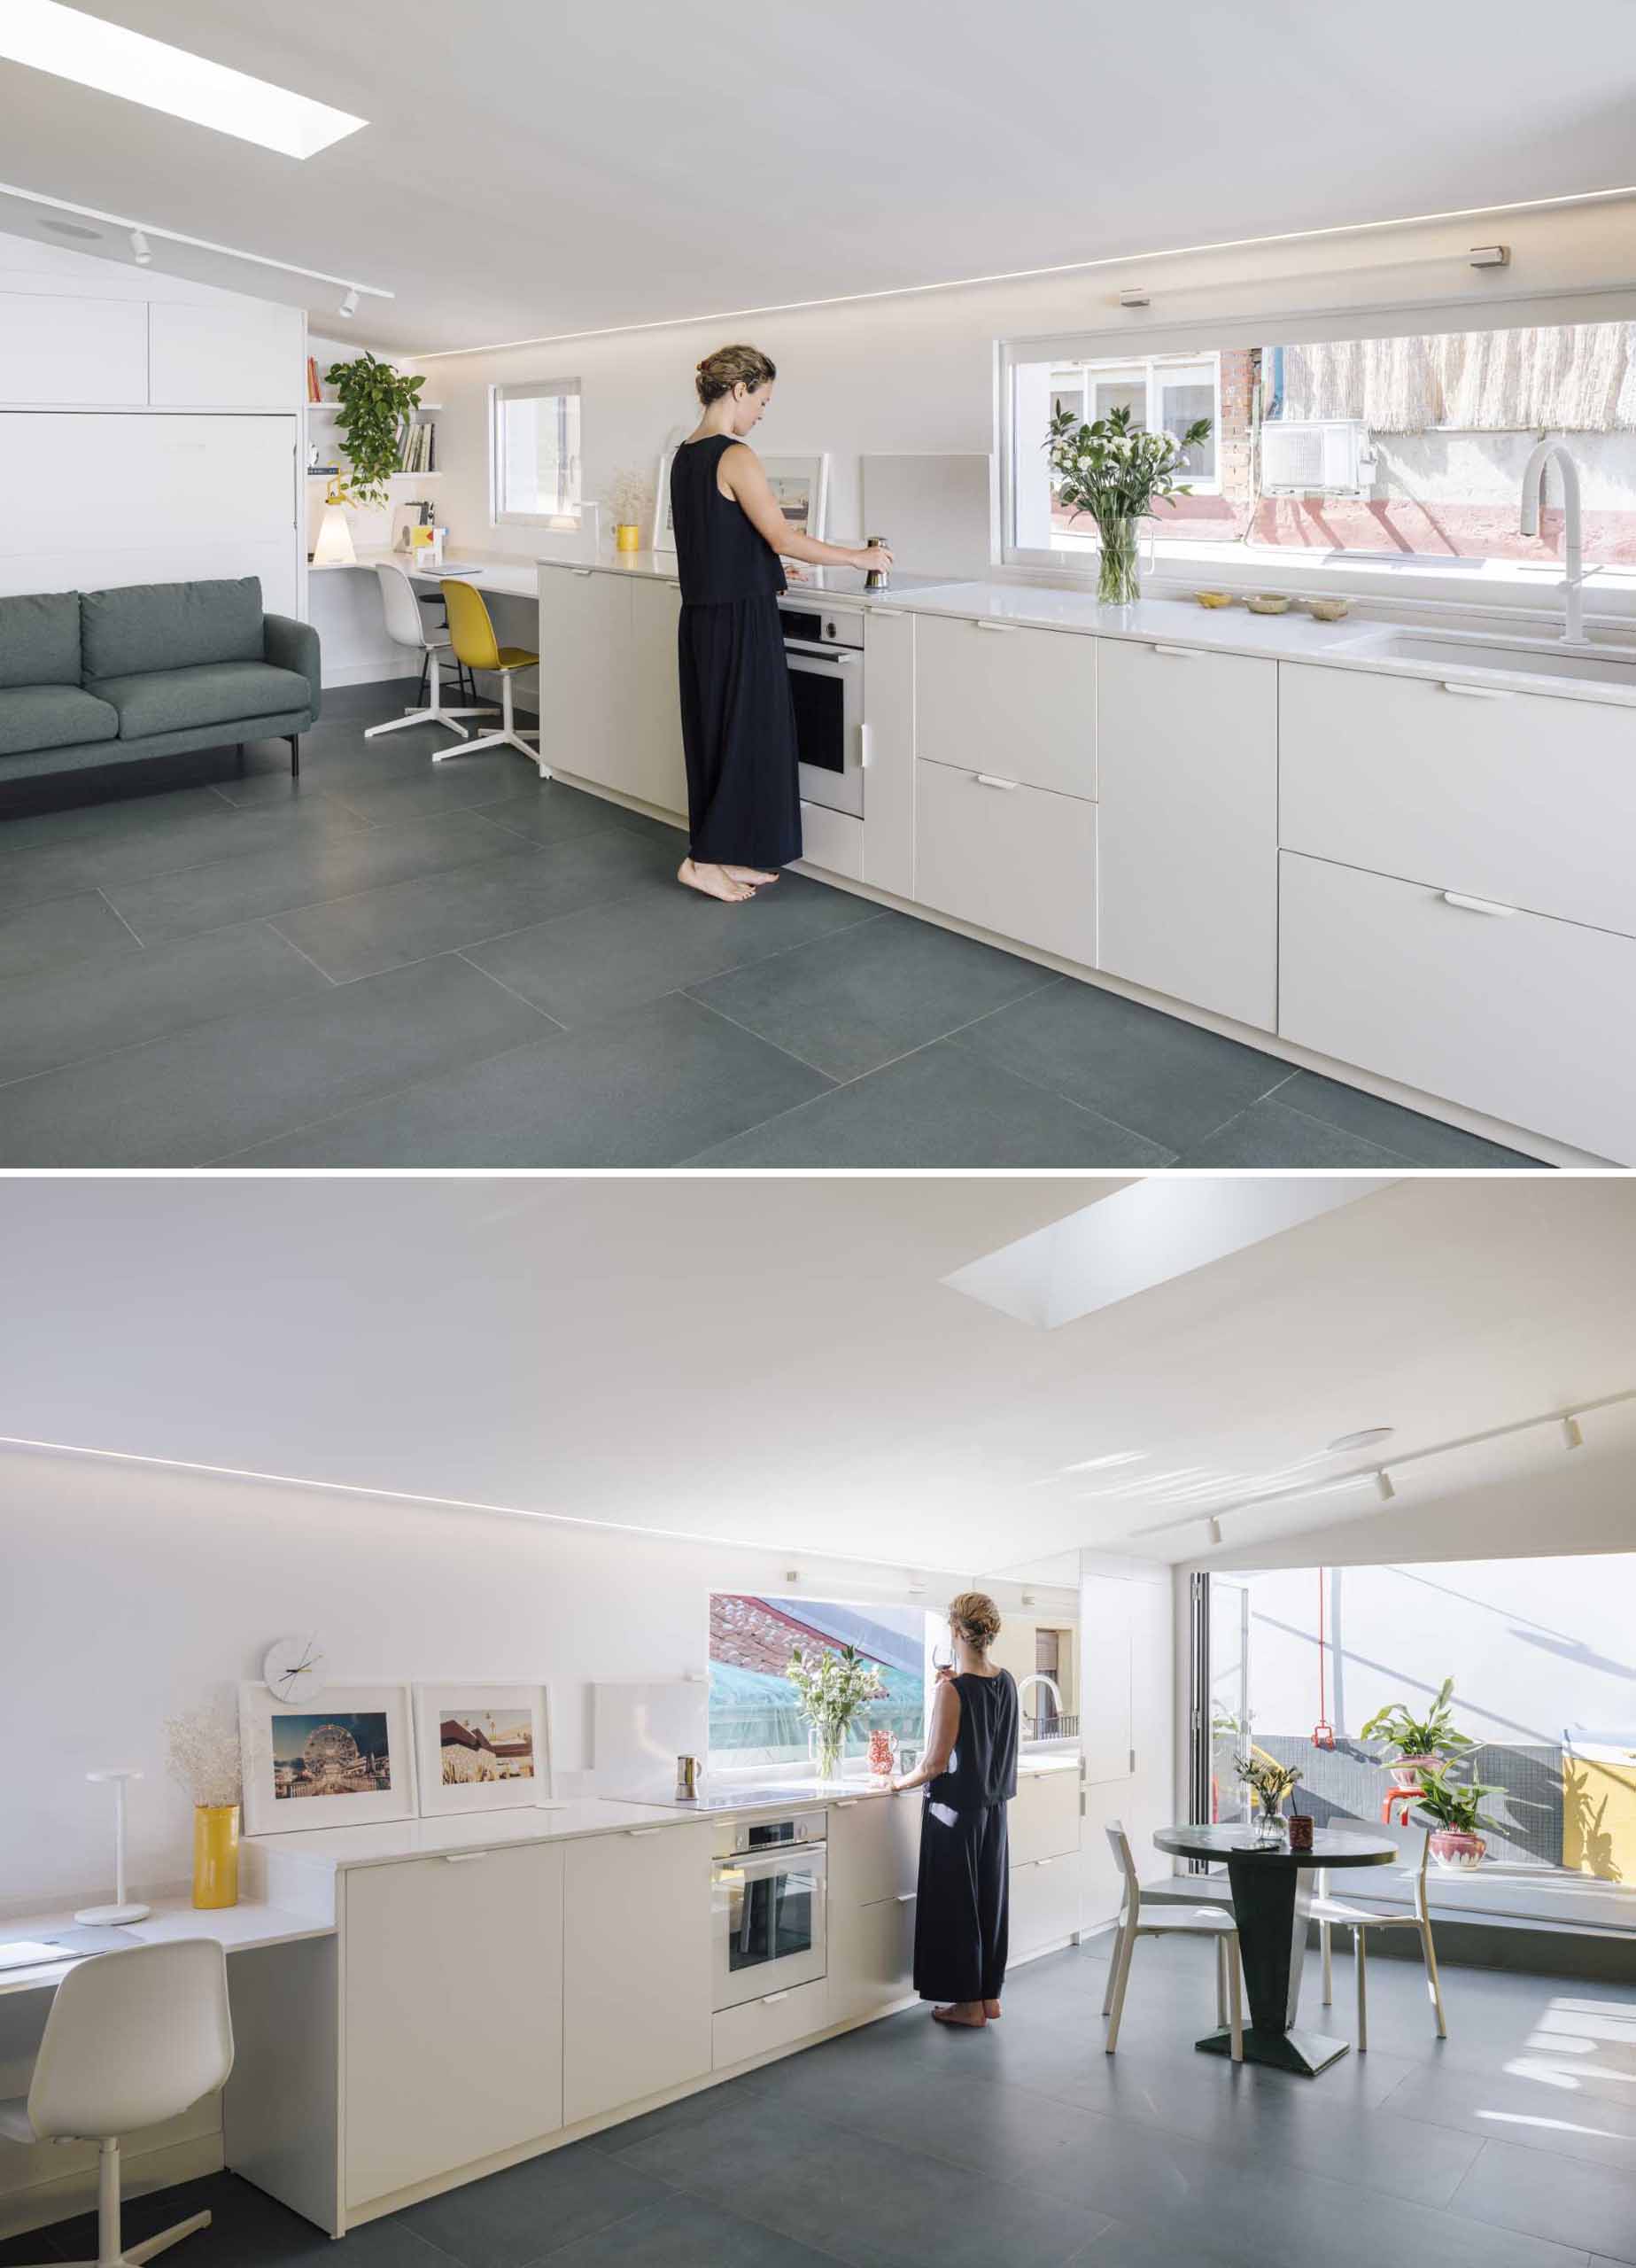 In this small apartment, a white kitchen runs along the wall and underneath the window, while the kitchen countertop transitions into the desktop in the home office.